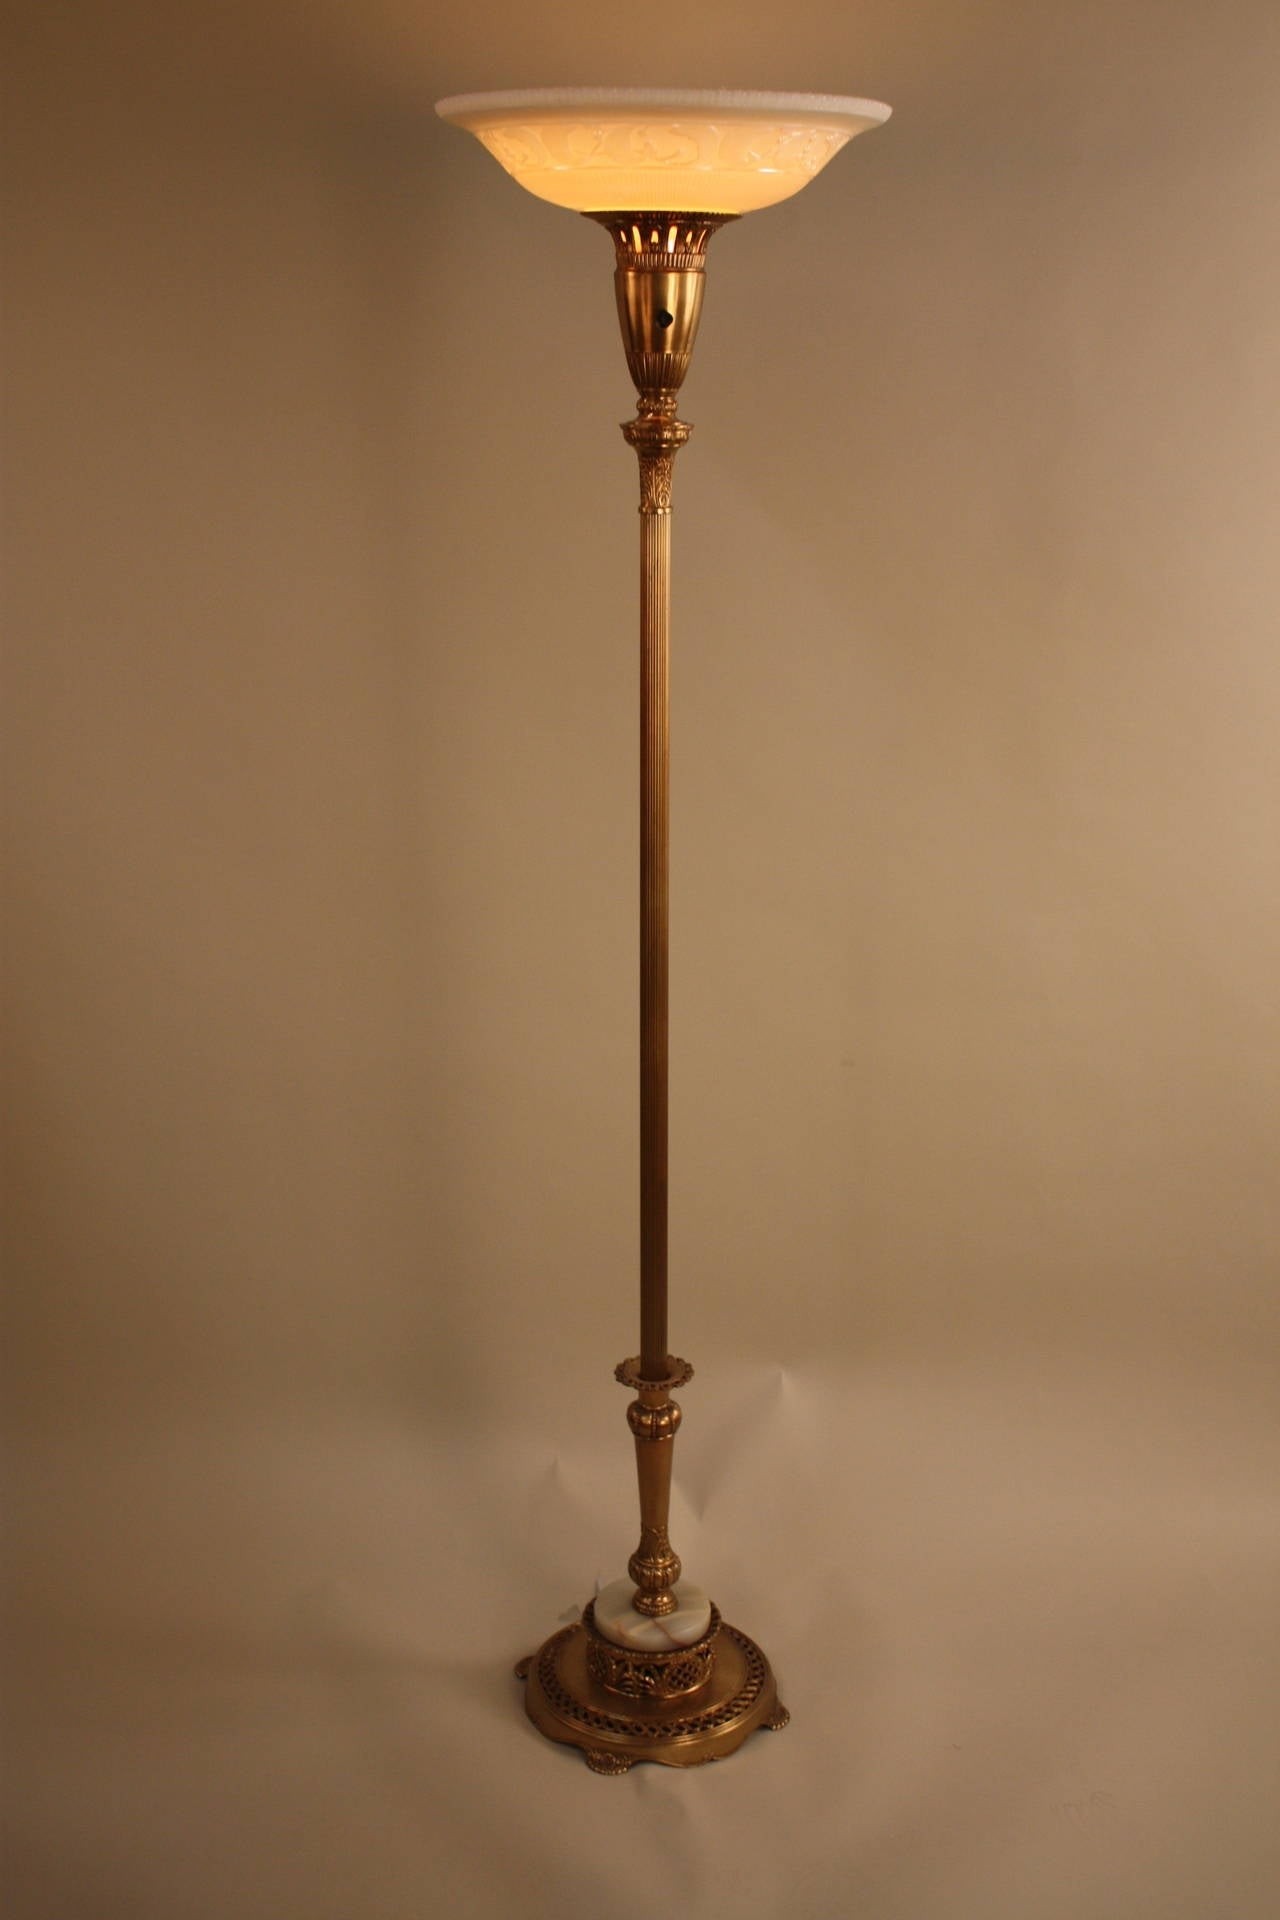 American torchiere floor lamp from a unique collection of antique